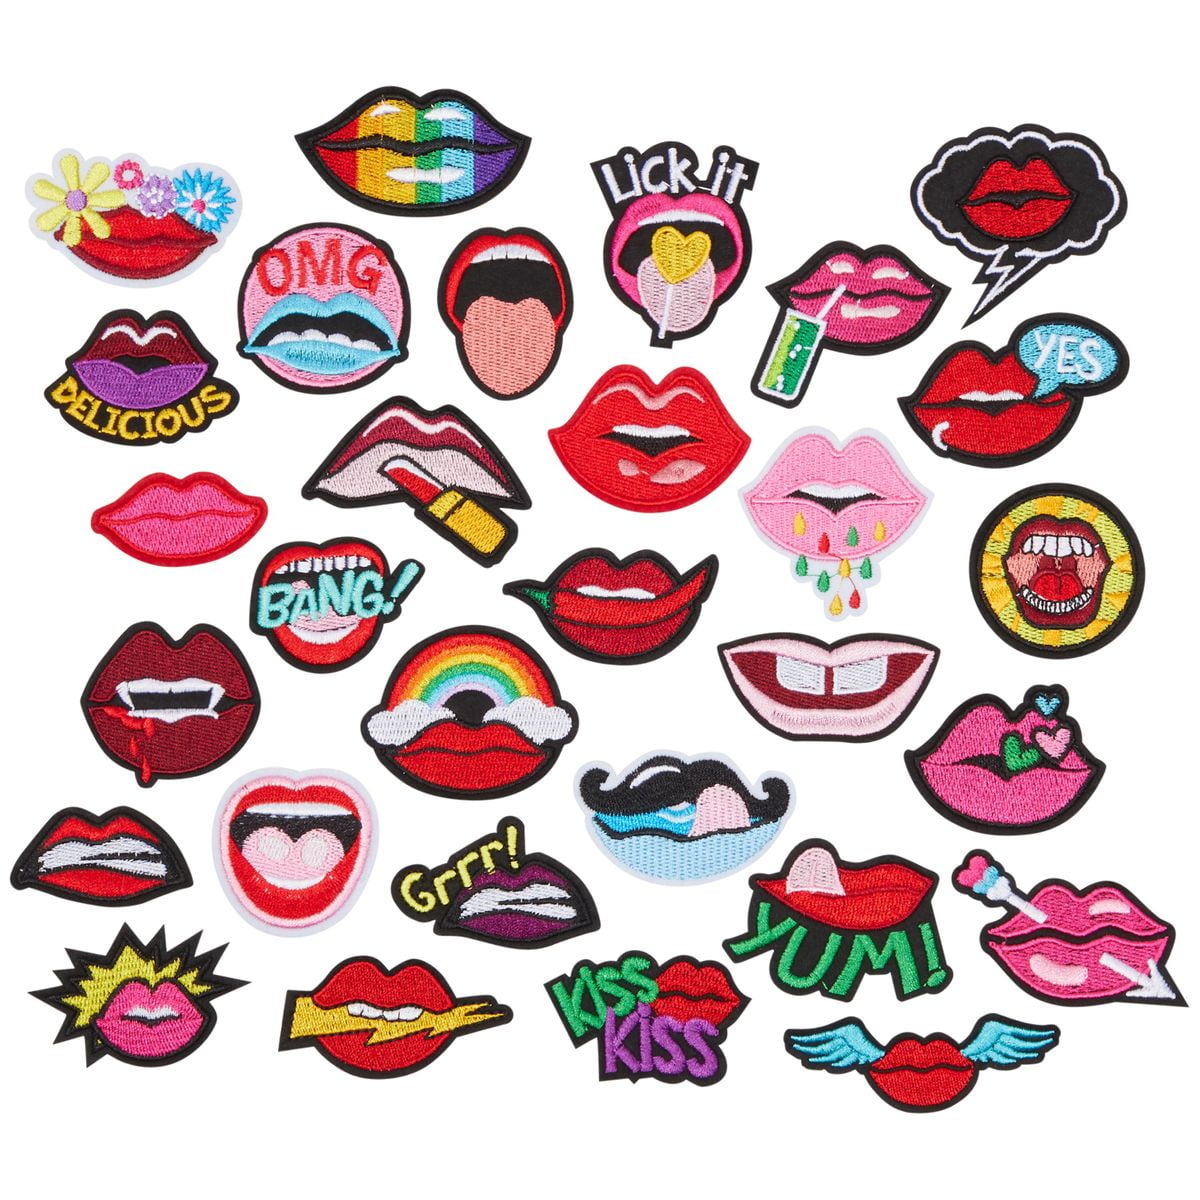 Nail Polish Patch Iron Sew On Clothes Makeup Embroidered Badge Make Up Applique 